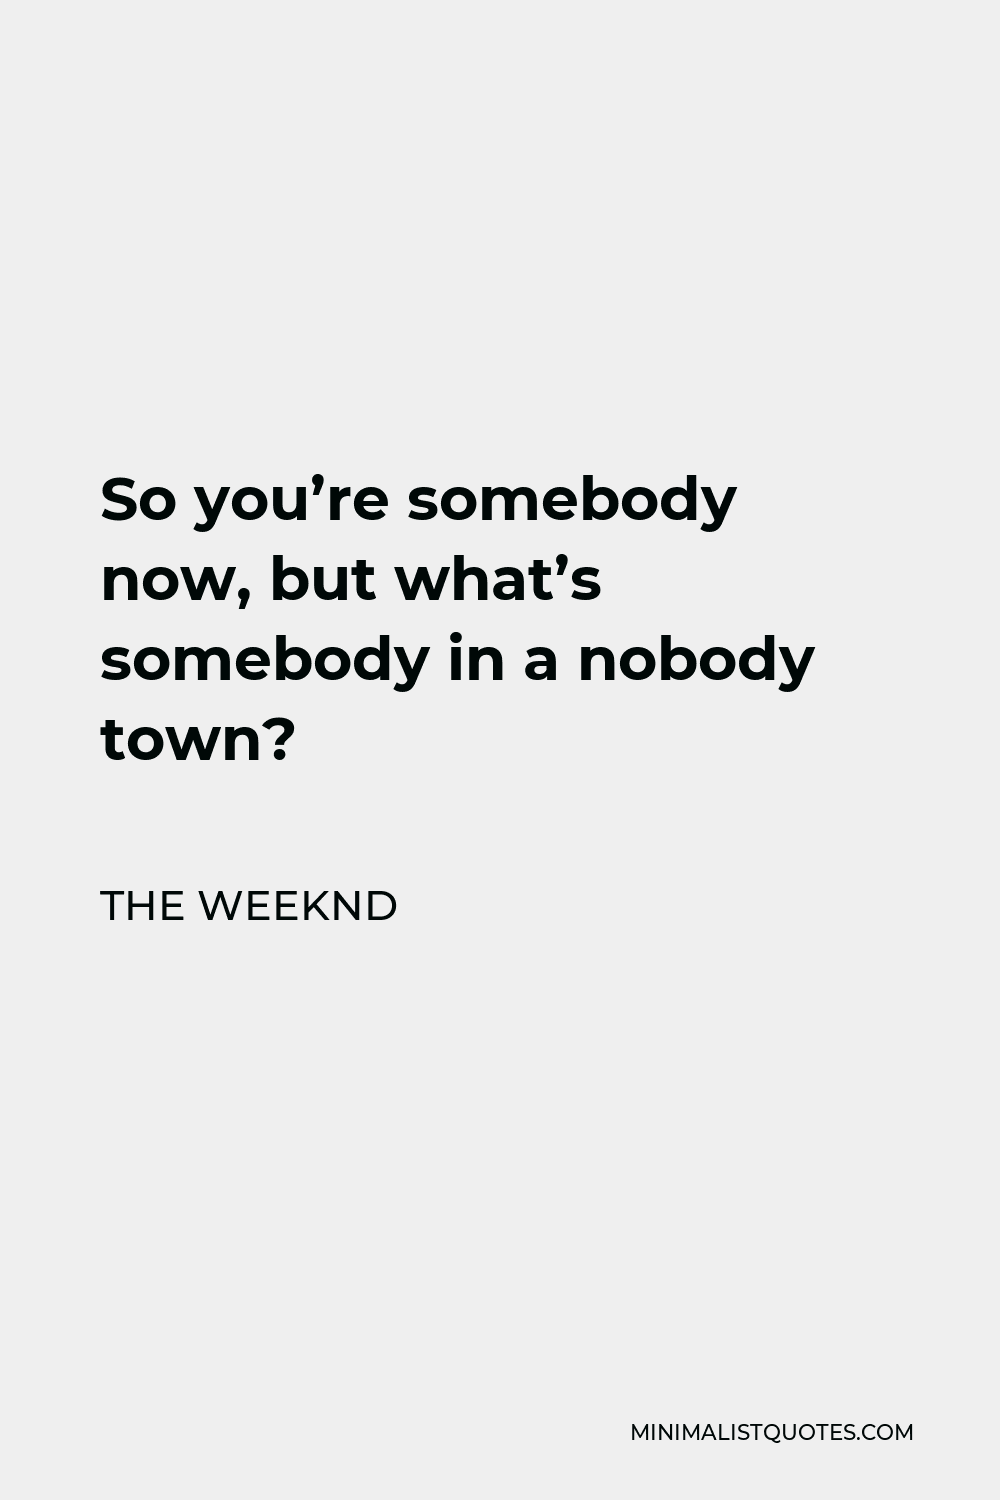 The Weeknd Quote - So you’re somebody now, but what’s somebody in a nobody town?